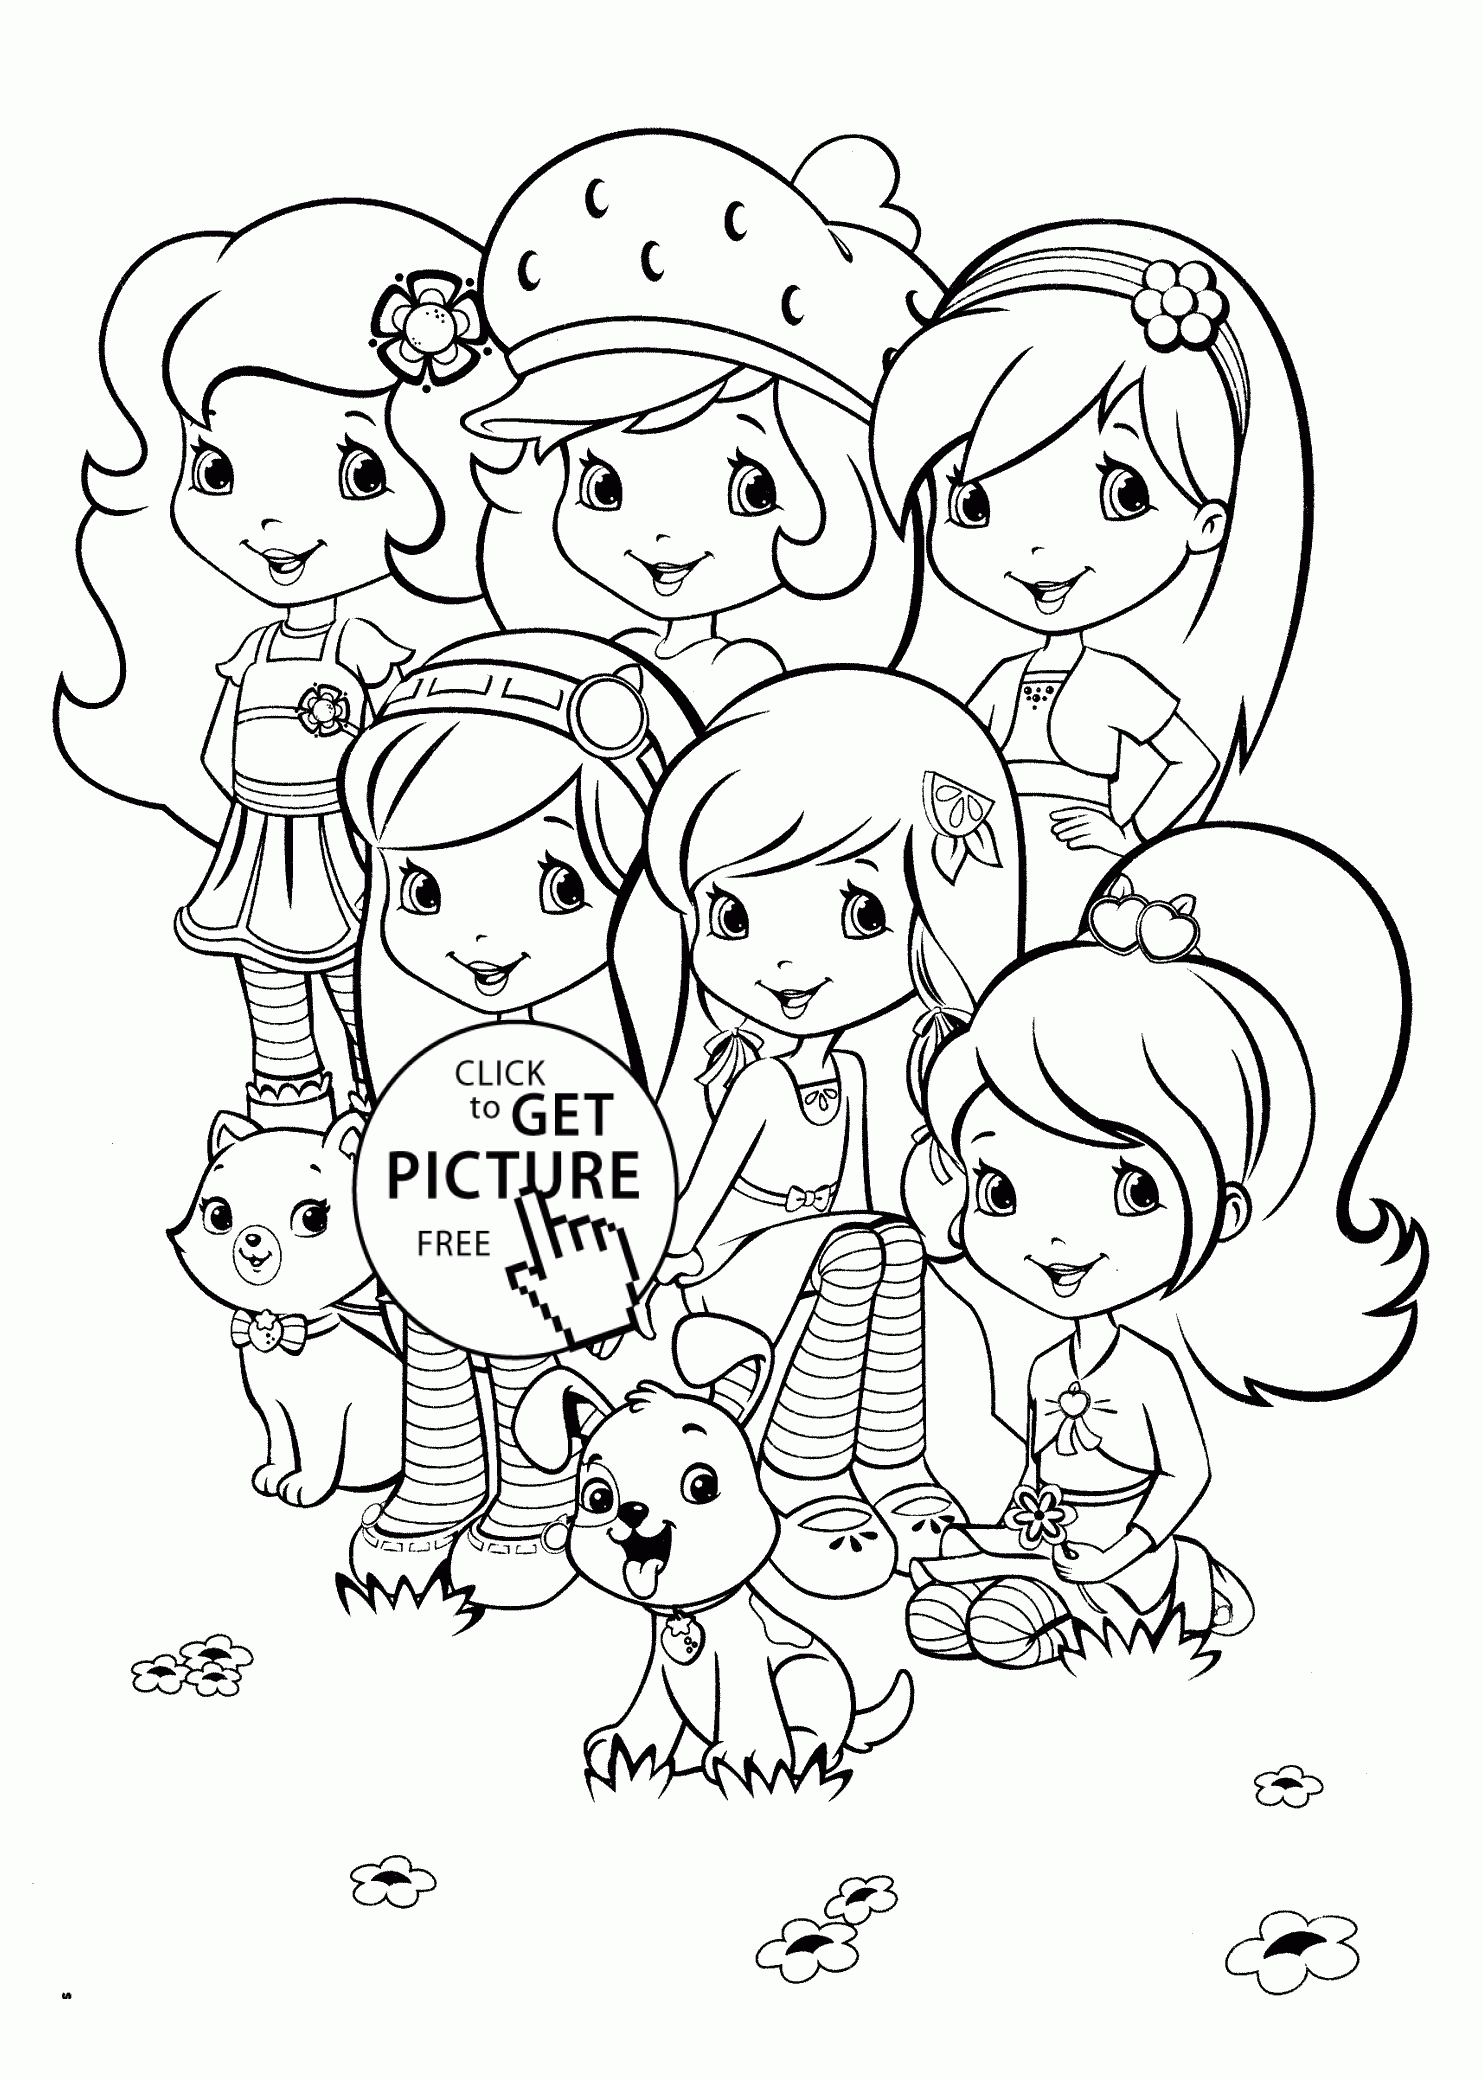 Team Strawberry Shortcake Coloring Pages For Kids Printable Free - Strawberry Shortcake Coloring Pages Free Printable